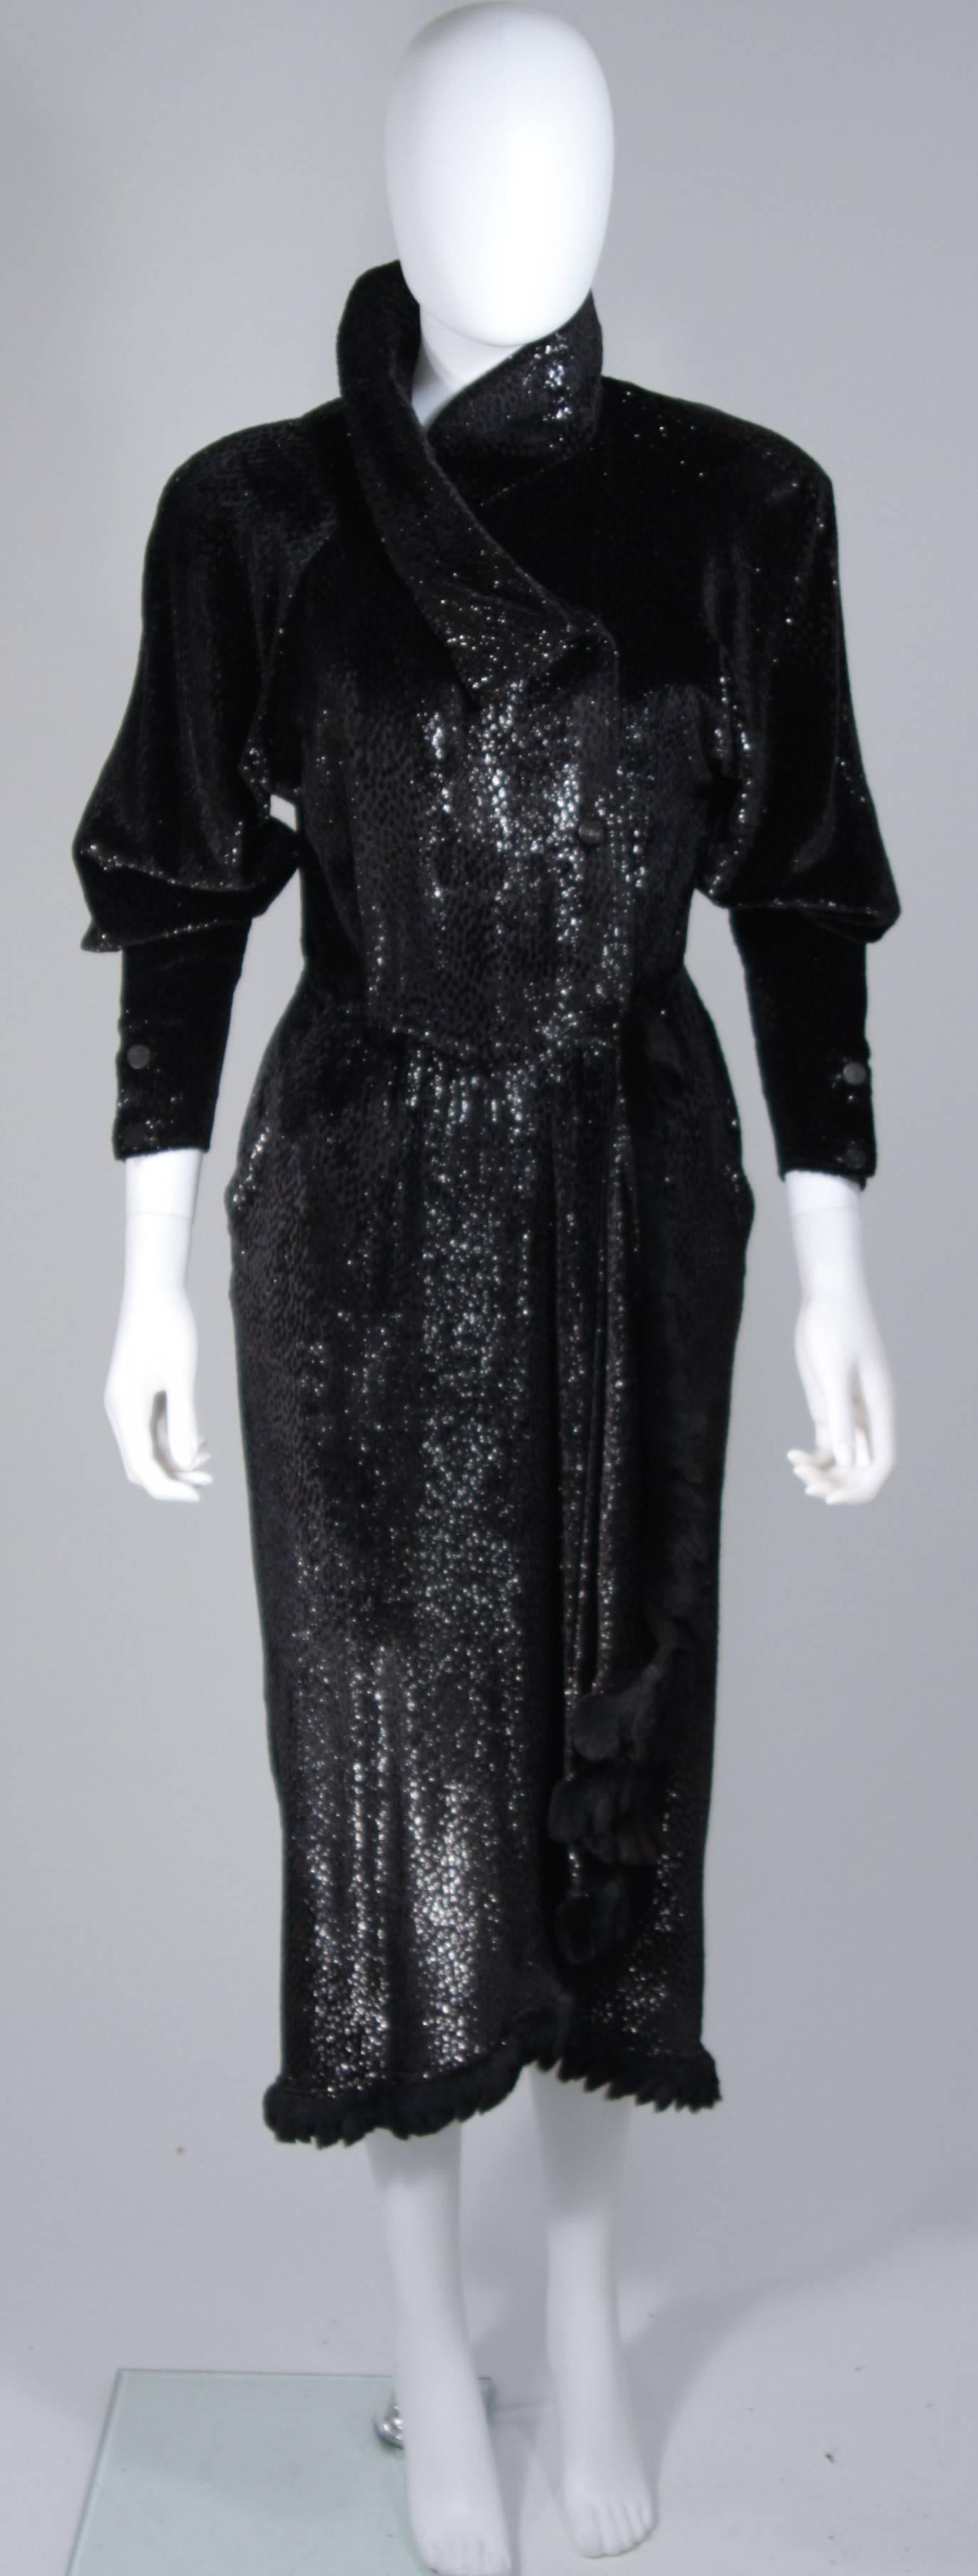   This Fendi cocktail dress is composed of a black shiny velvet like fabric. The wrap style features front closures with sheared mink trim and a draped skirt. Side pockets. In excellent vintage condition. 

**Please cross-reference measurements